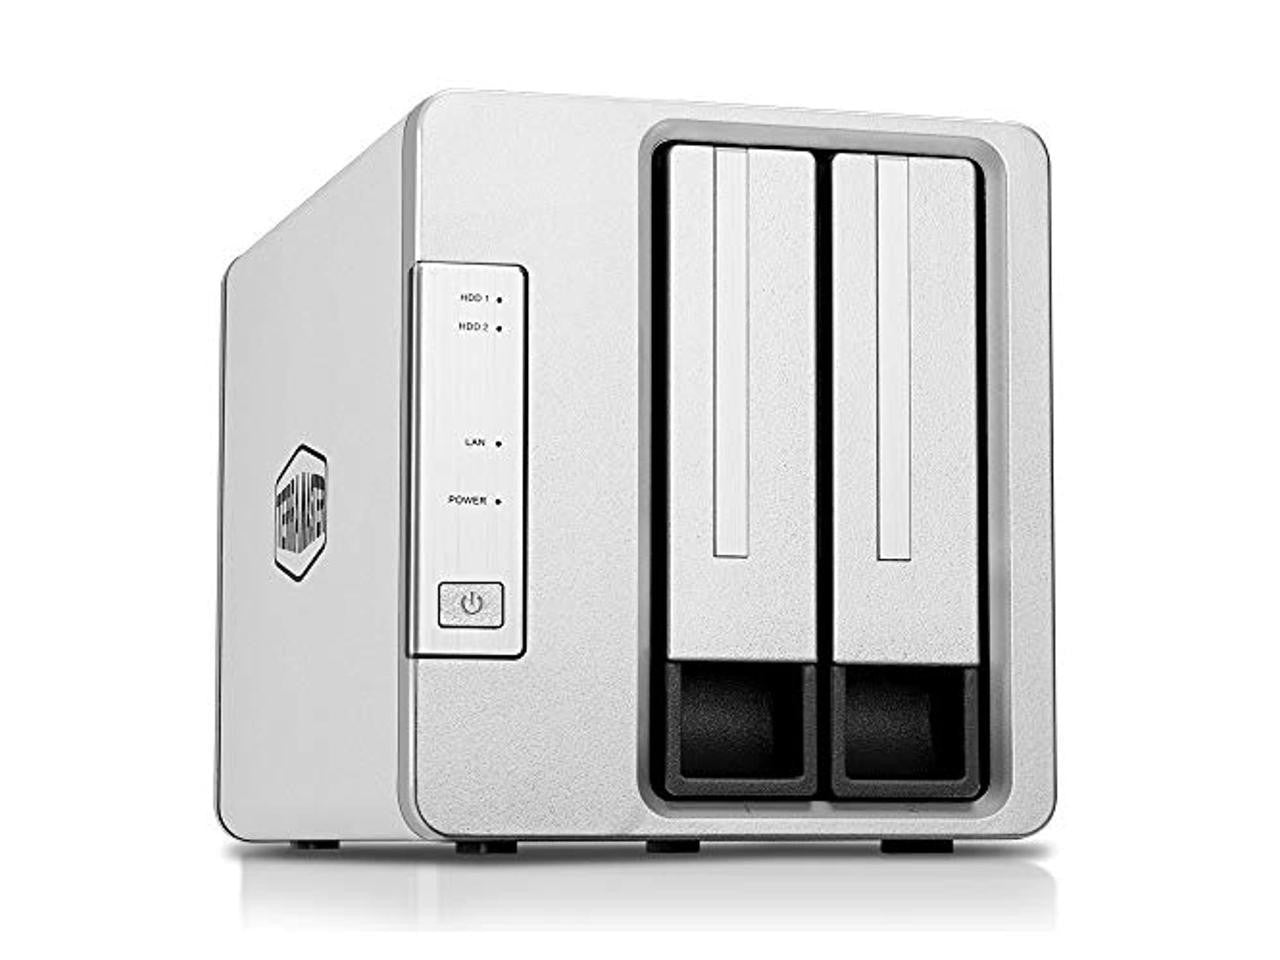 TerraMaster F2-210 2-Bay Home NAS with 20TB (2 x 10TB) of Western Digital Red Plus Drives Fully Assembled and Tested